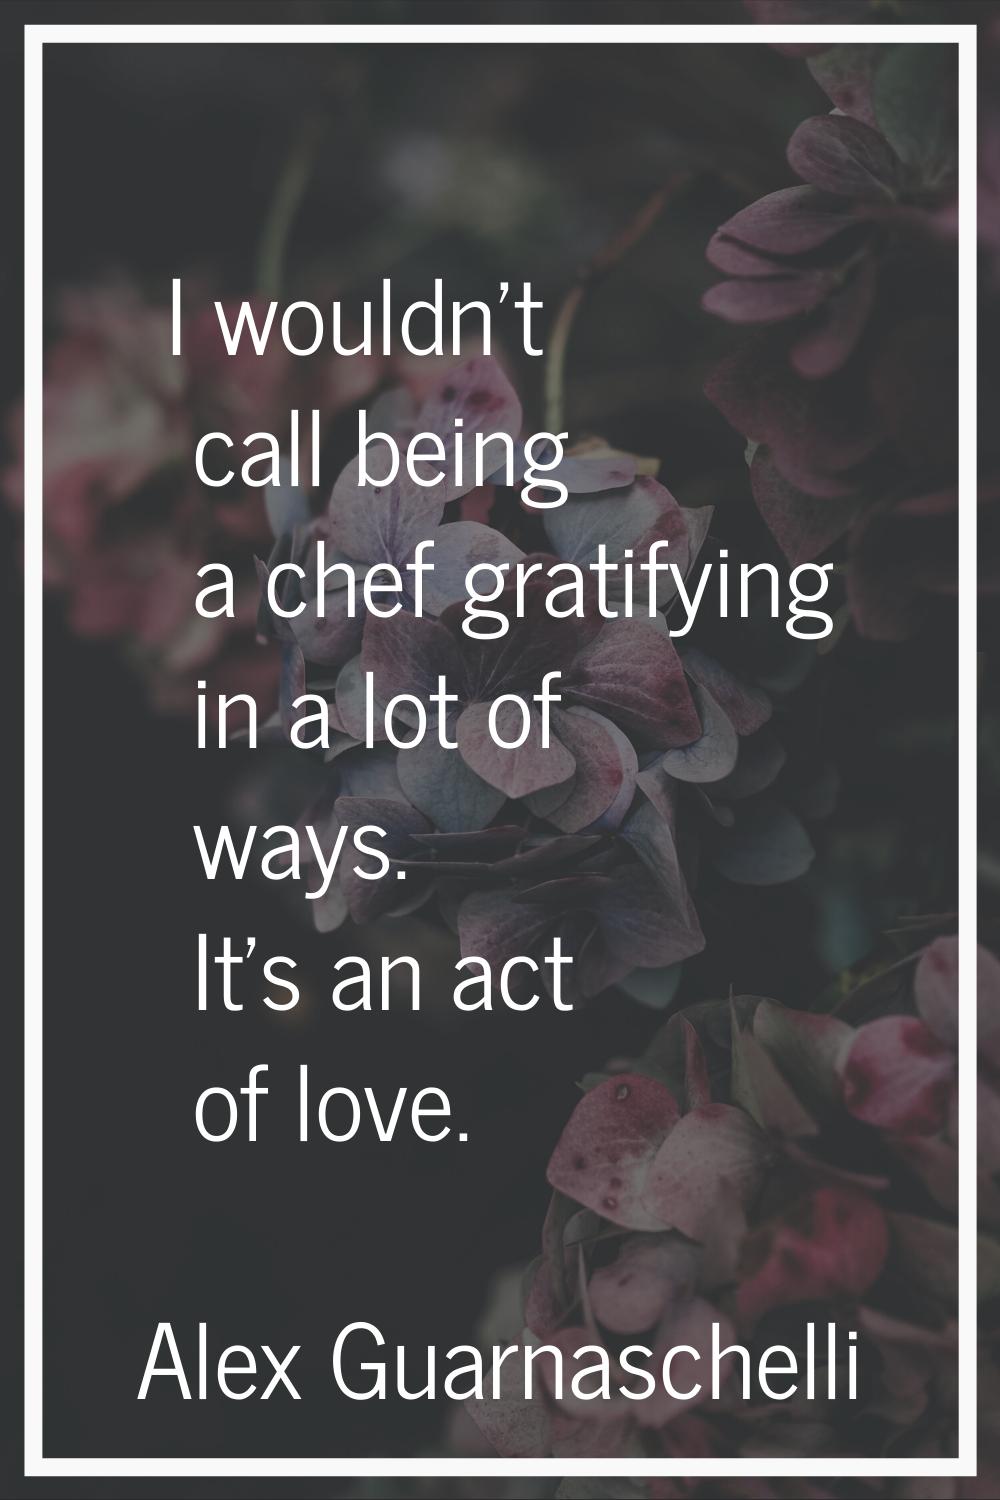 I wouldn't call being a chef gratifying in a lot of ways. It's an act of love.